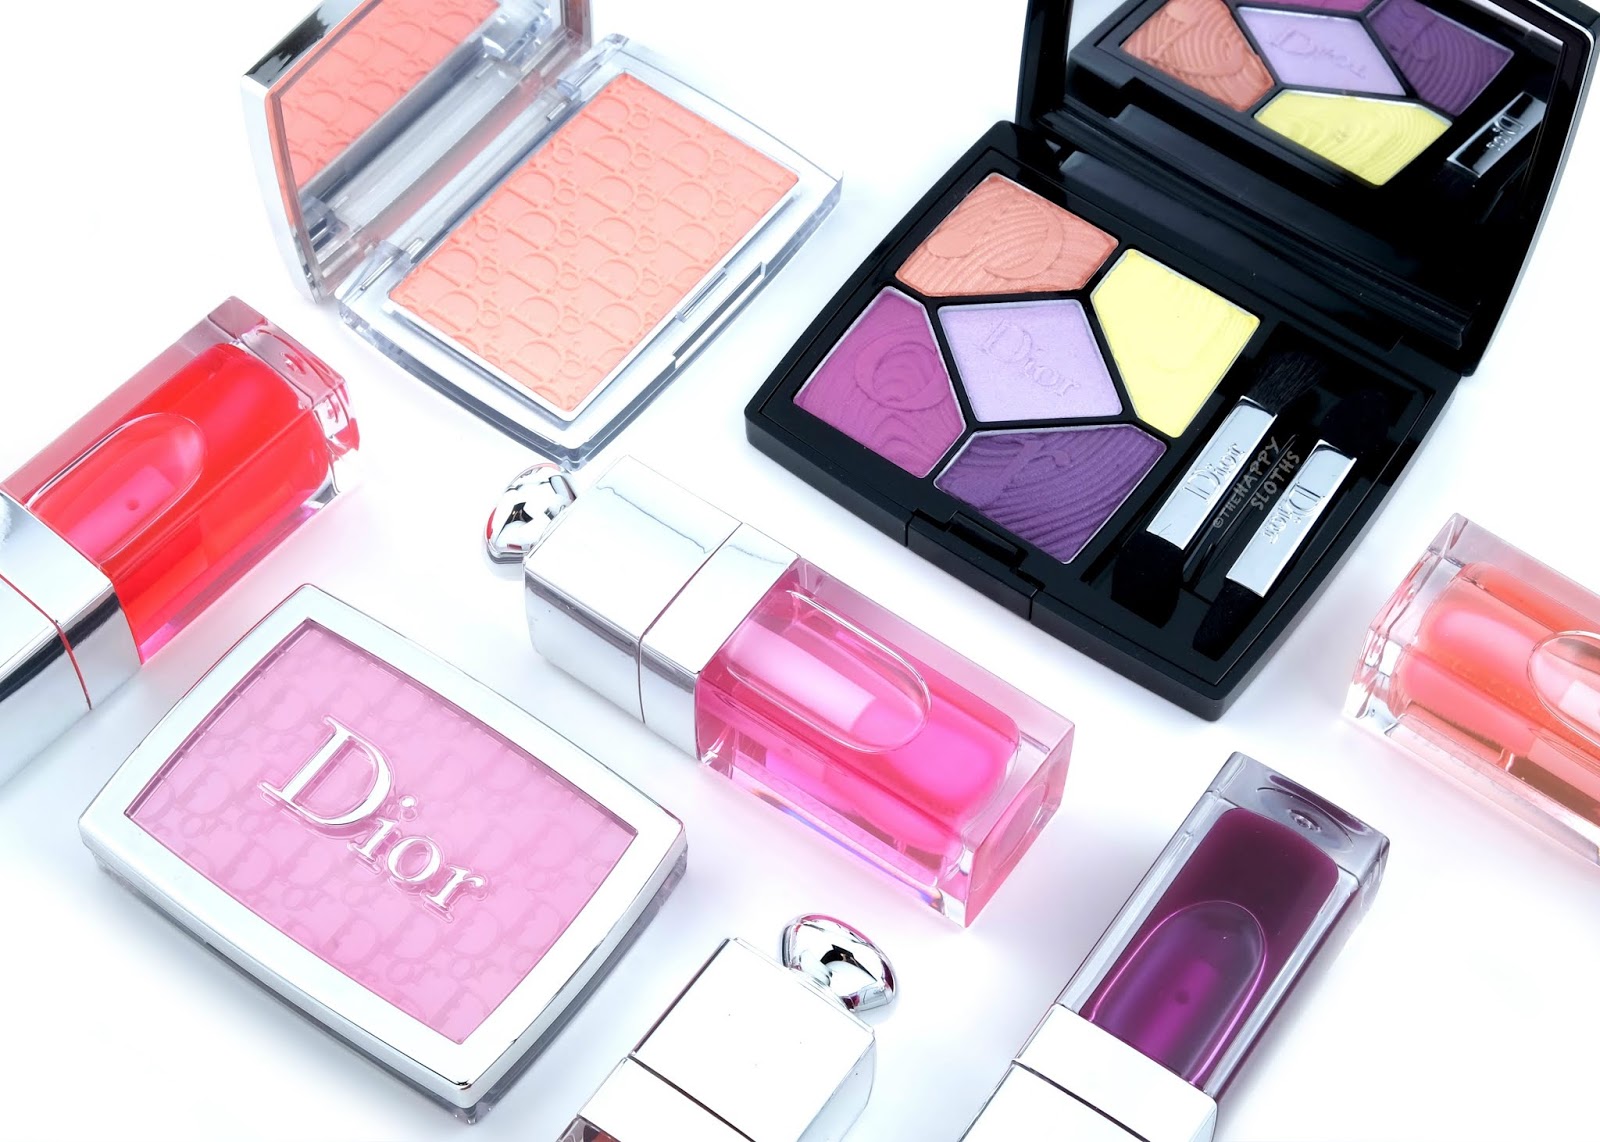 Dior, Spring 2020 Glow Vibes Collection: Review and Swatches